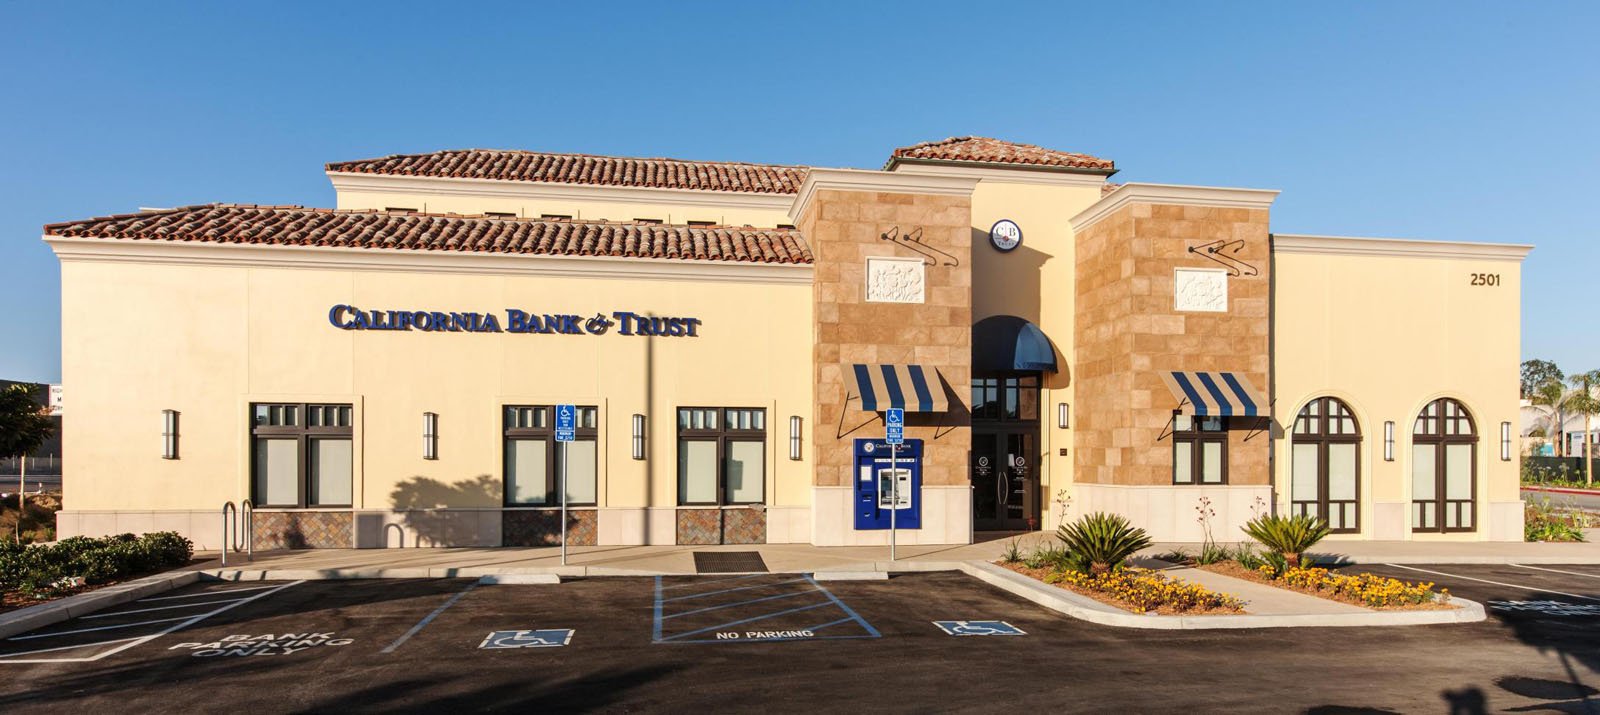 California Bank and Trust Palomar Commons exterior view